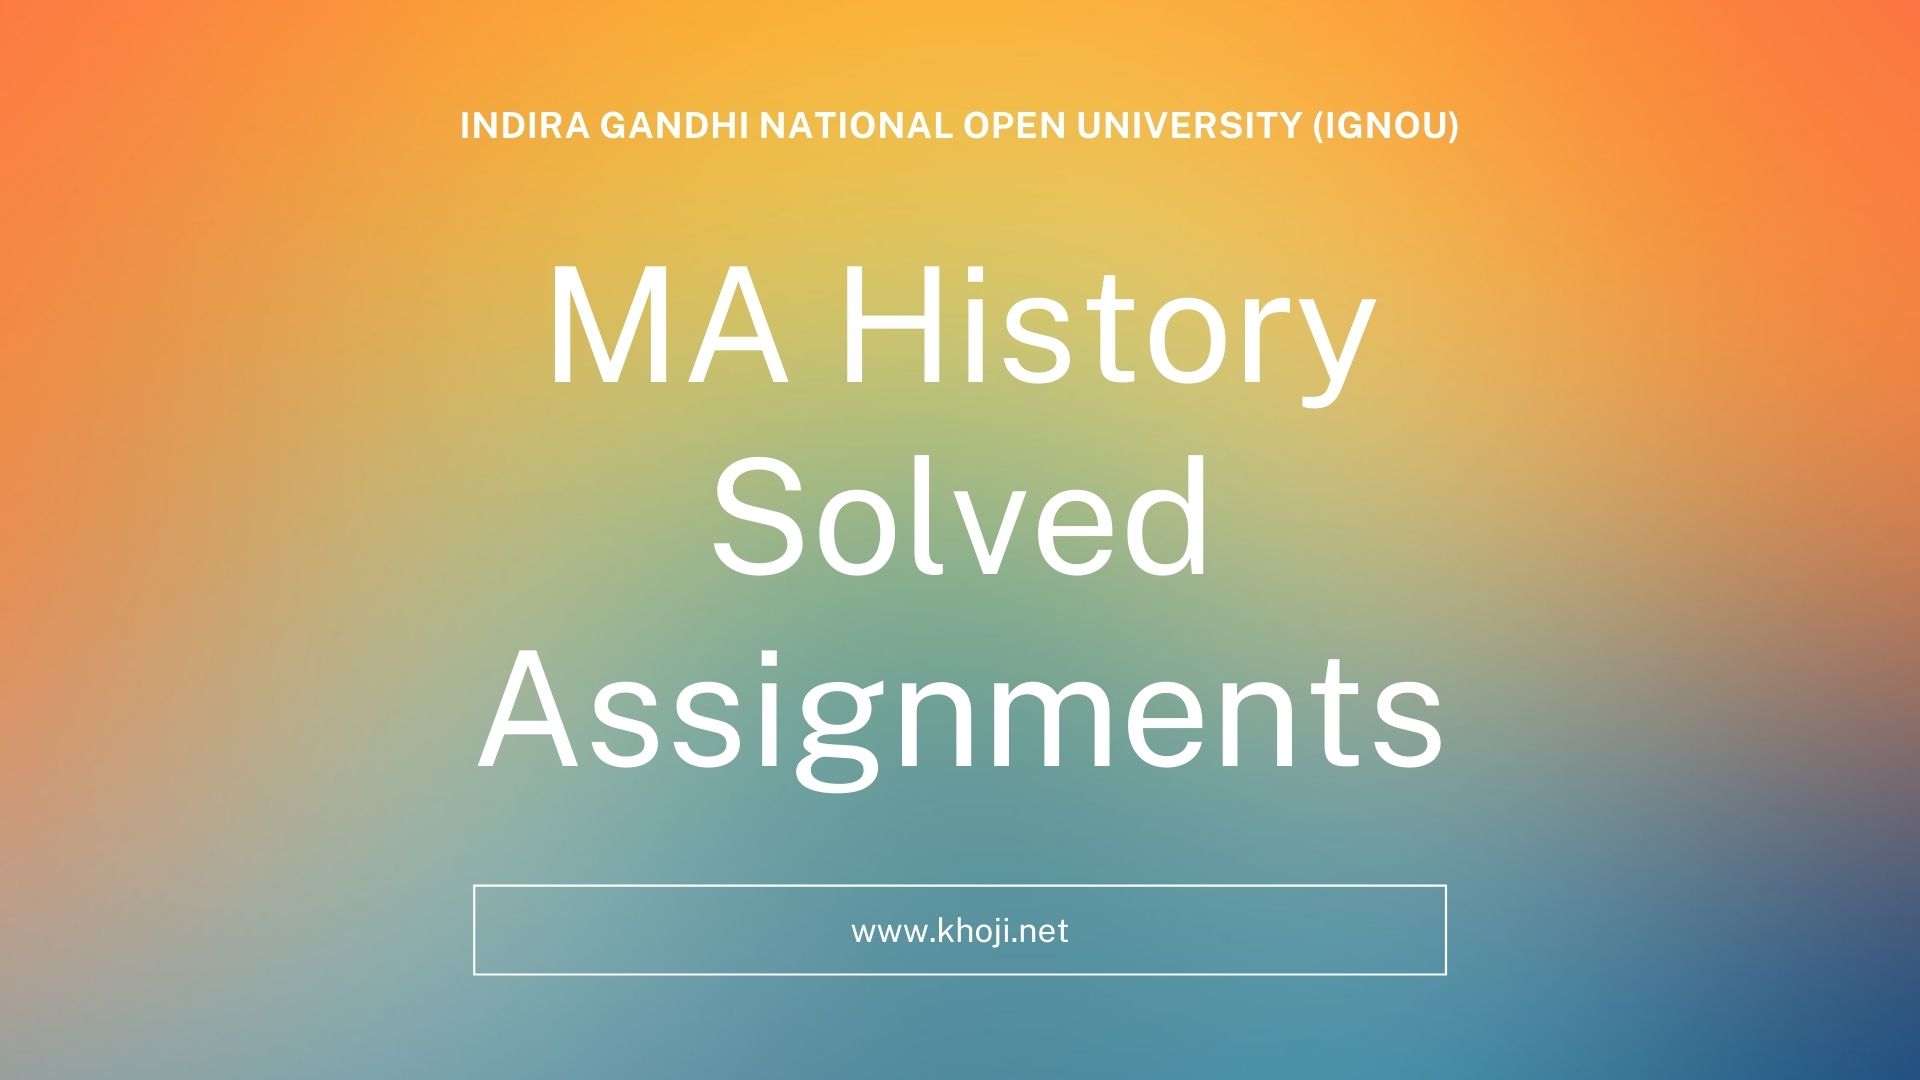 IGNOU MA History Solved Assignments KHOJINET